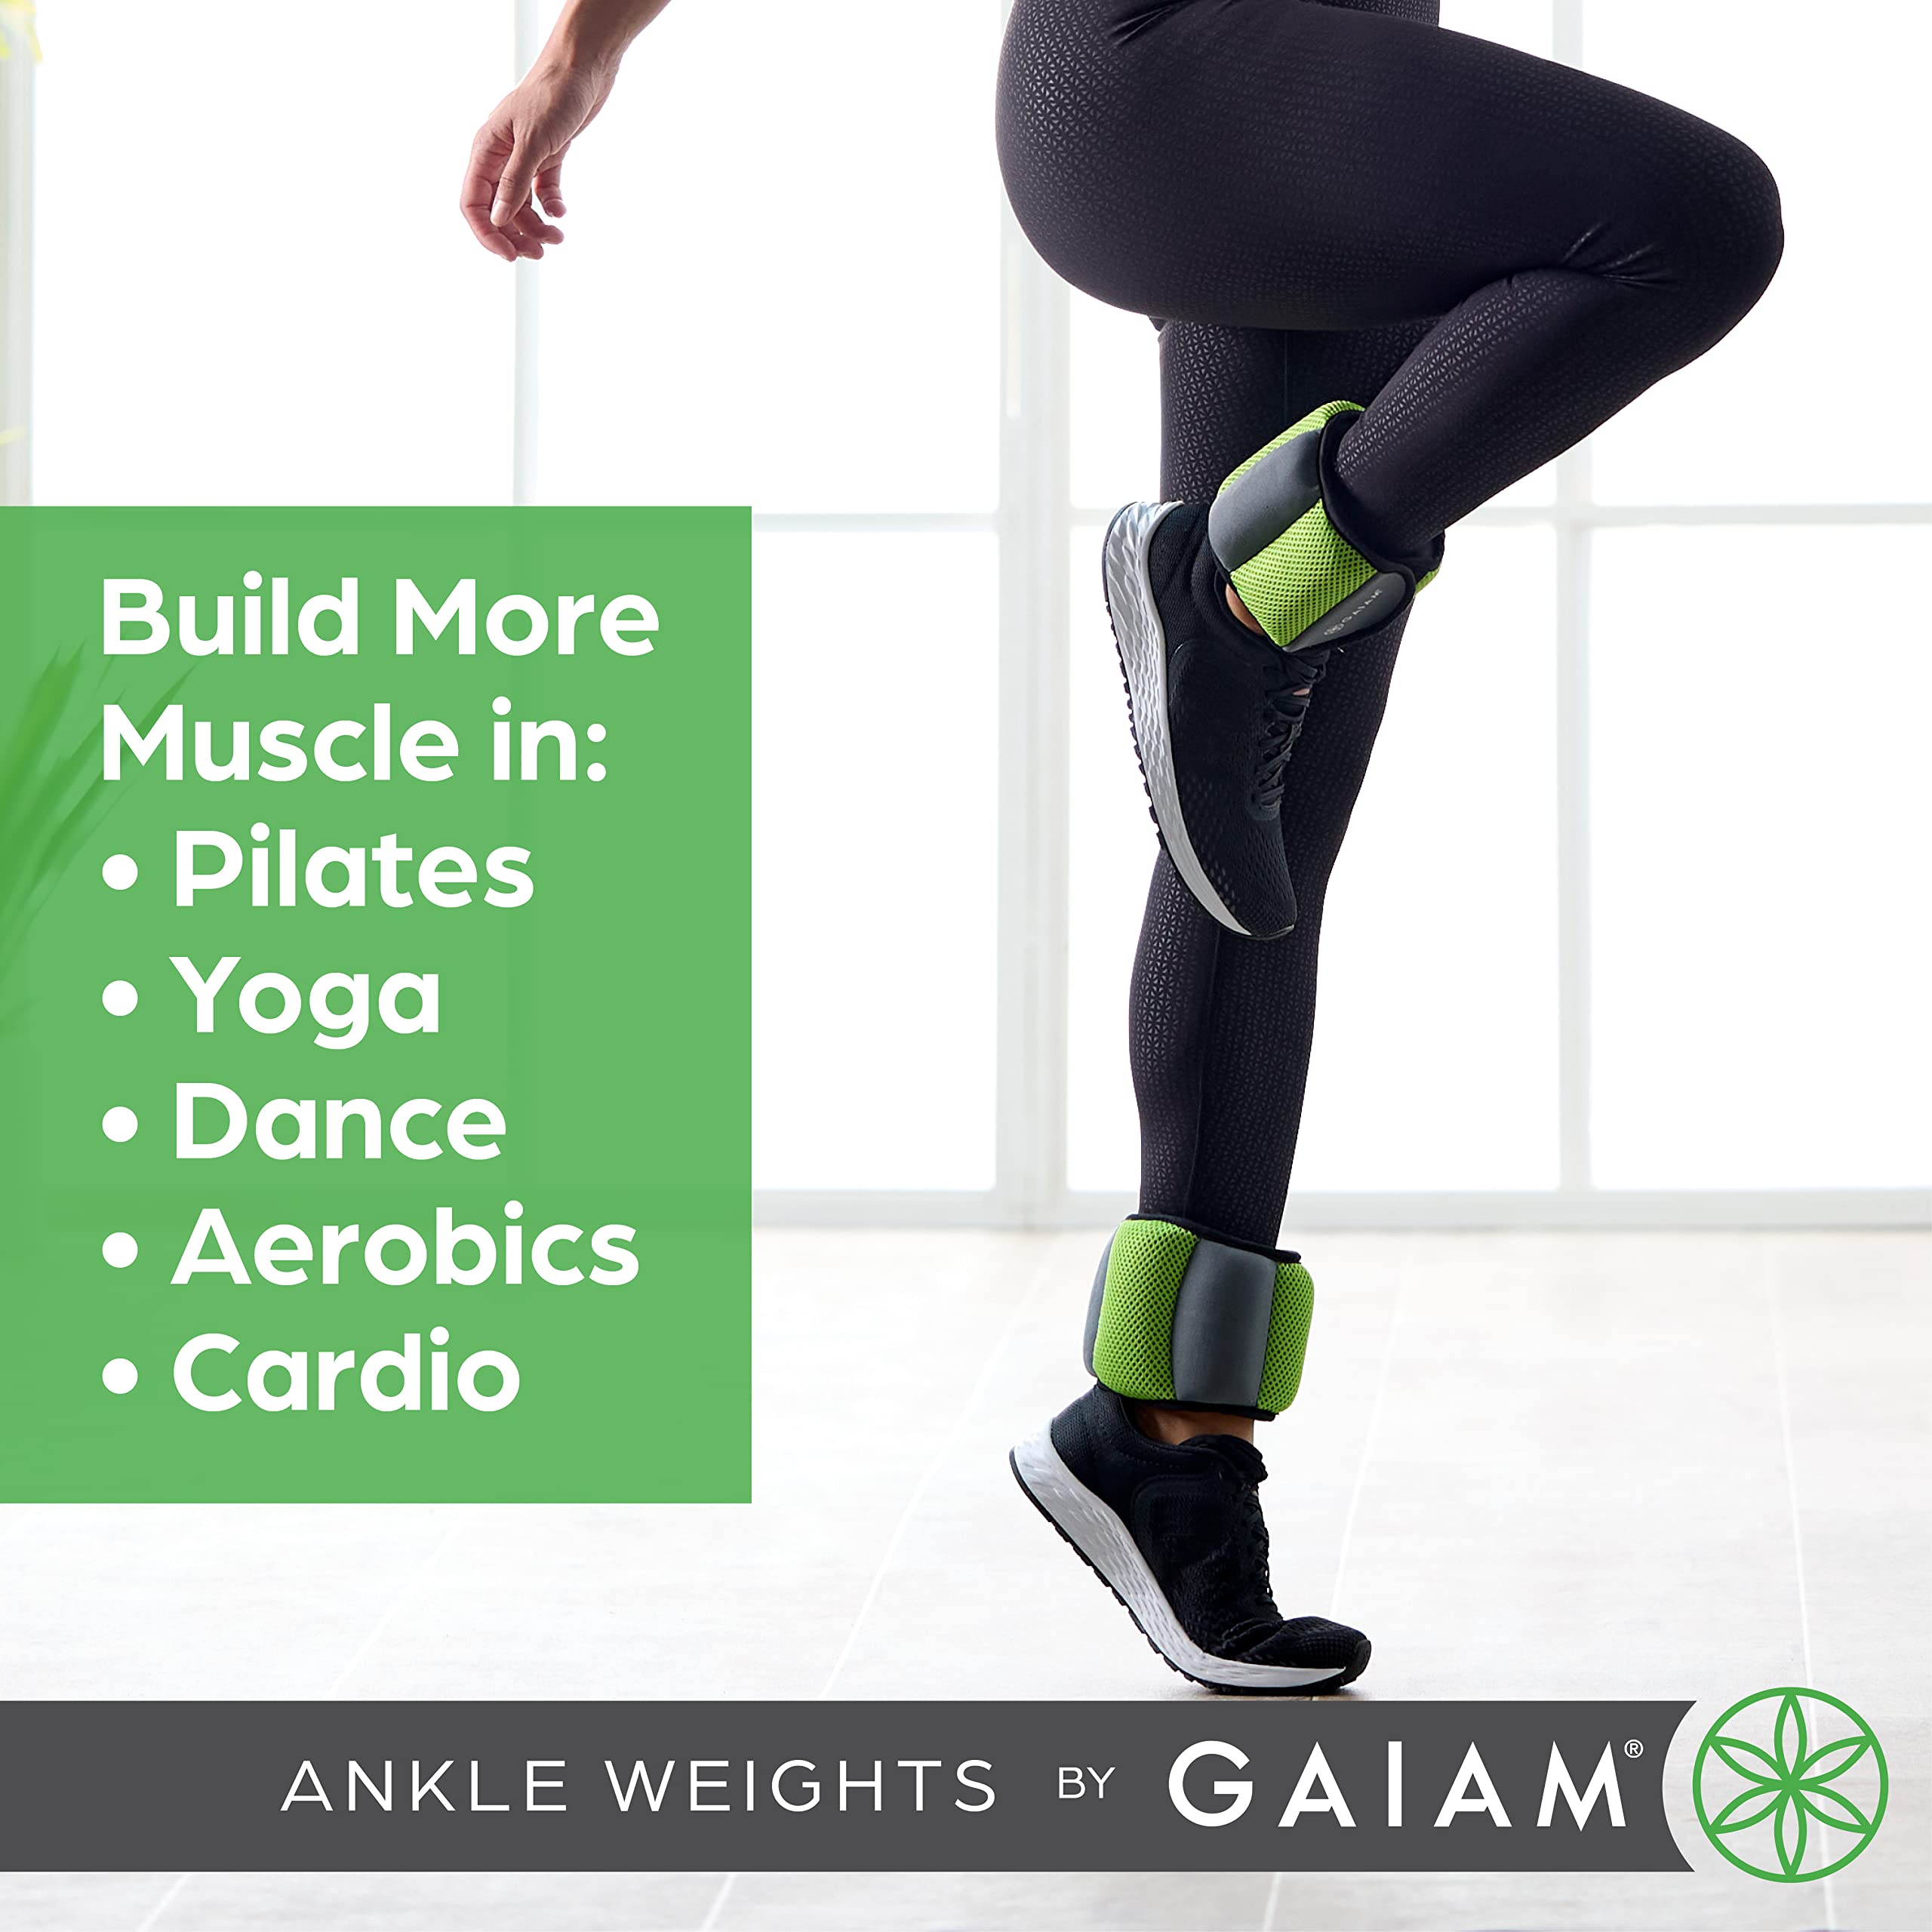 Gaiam Ankle Weights Strength Training Weight Sets For Women & Men With Adjustable Straps - Walking, Running, Pilates, Yoga, Danc